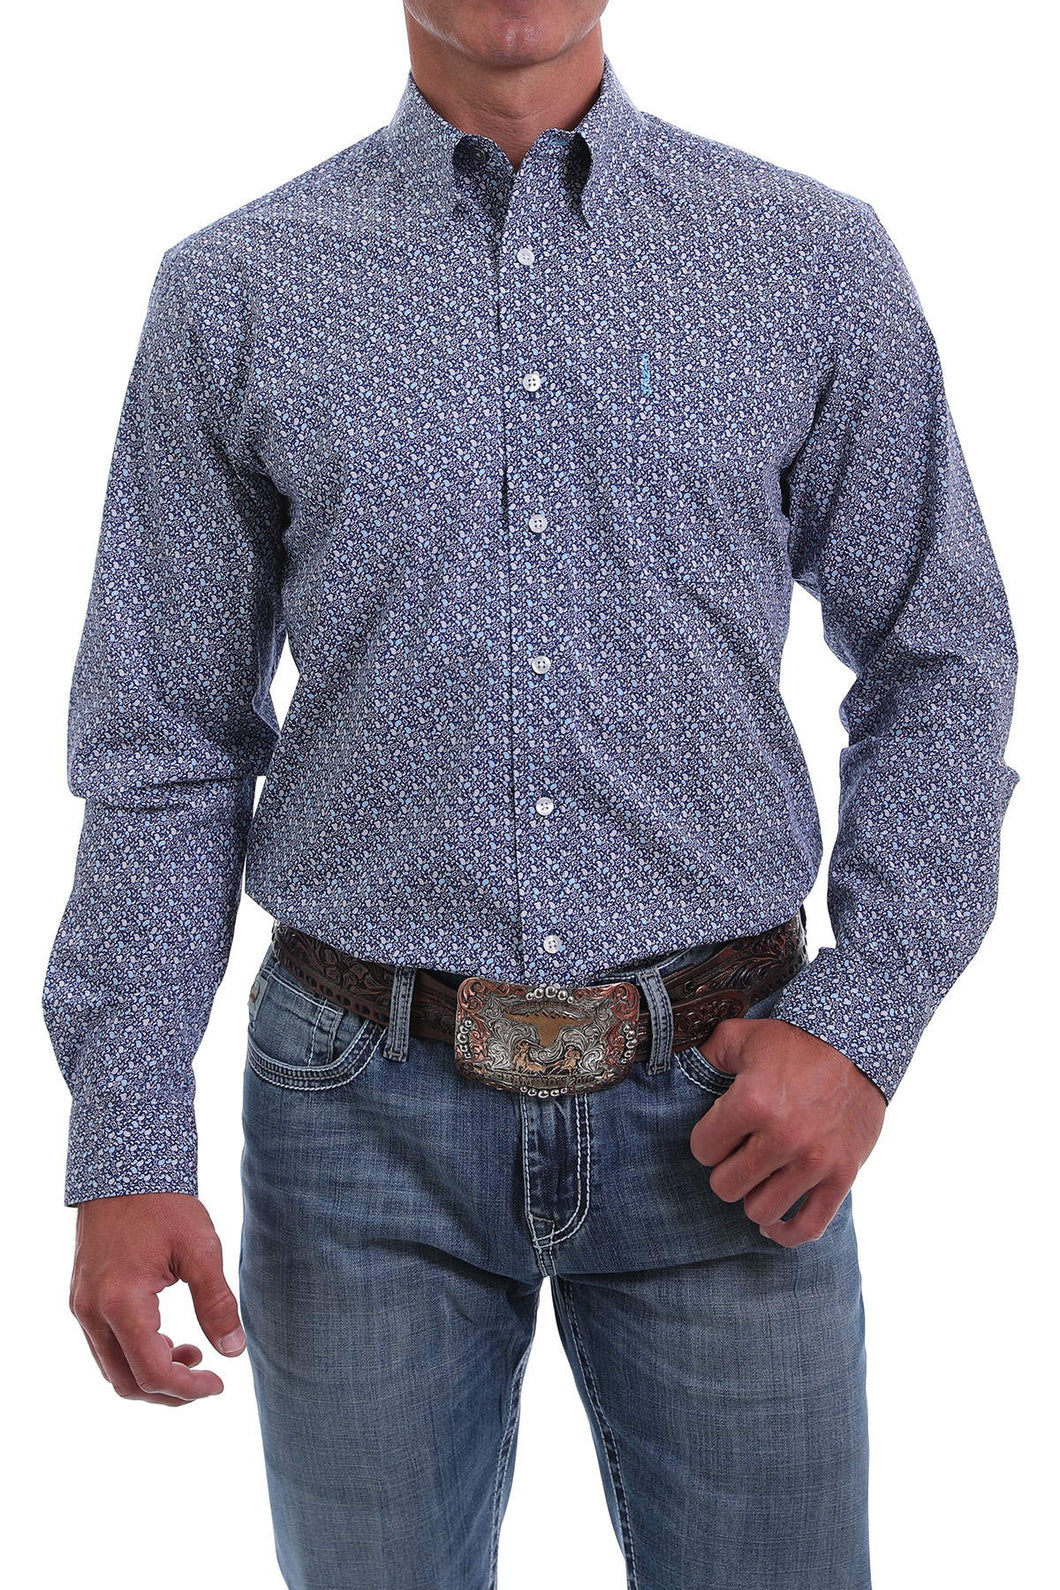 MEN'S MODERN FIT NAVY, GRAY AND BLUE PINE PAISLEY BUTTON-DOWN SHIRT